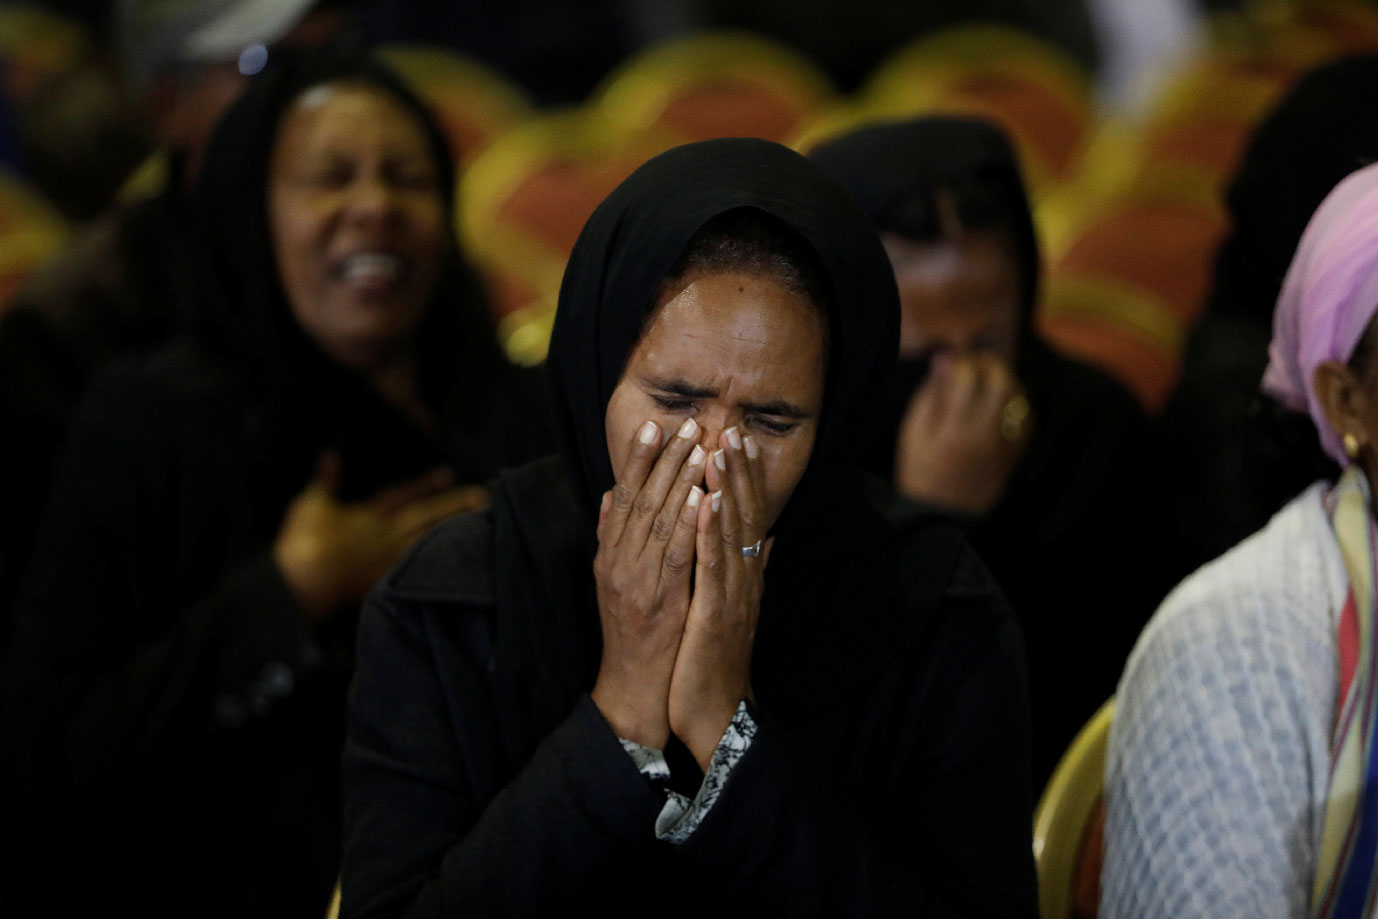 A mourner reacts during a memorial ceremony for the Ethiopian Army Chief of Staff Seare Mekonnen